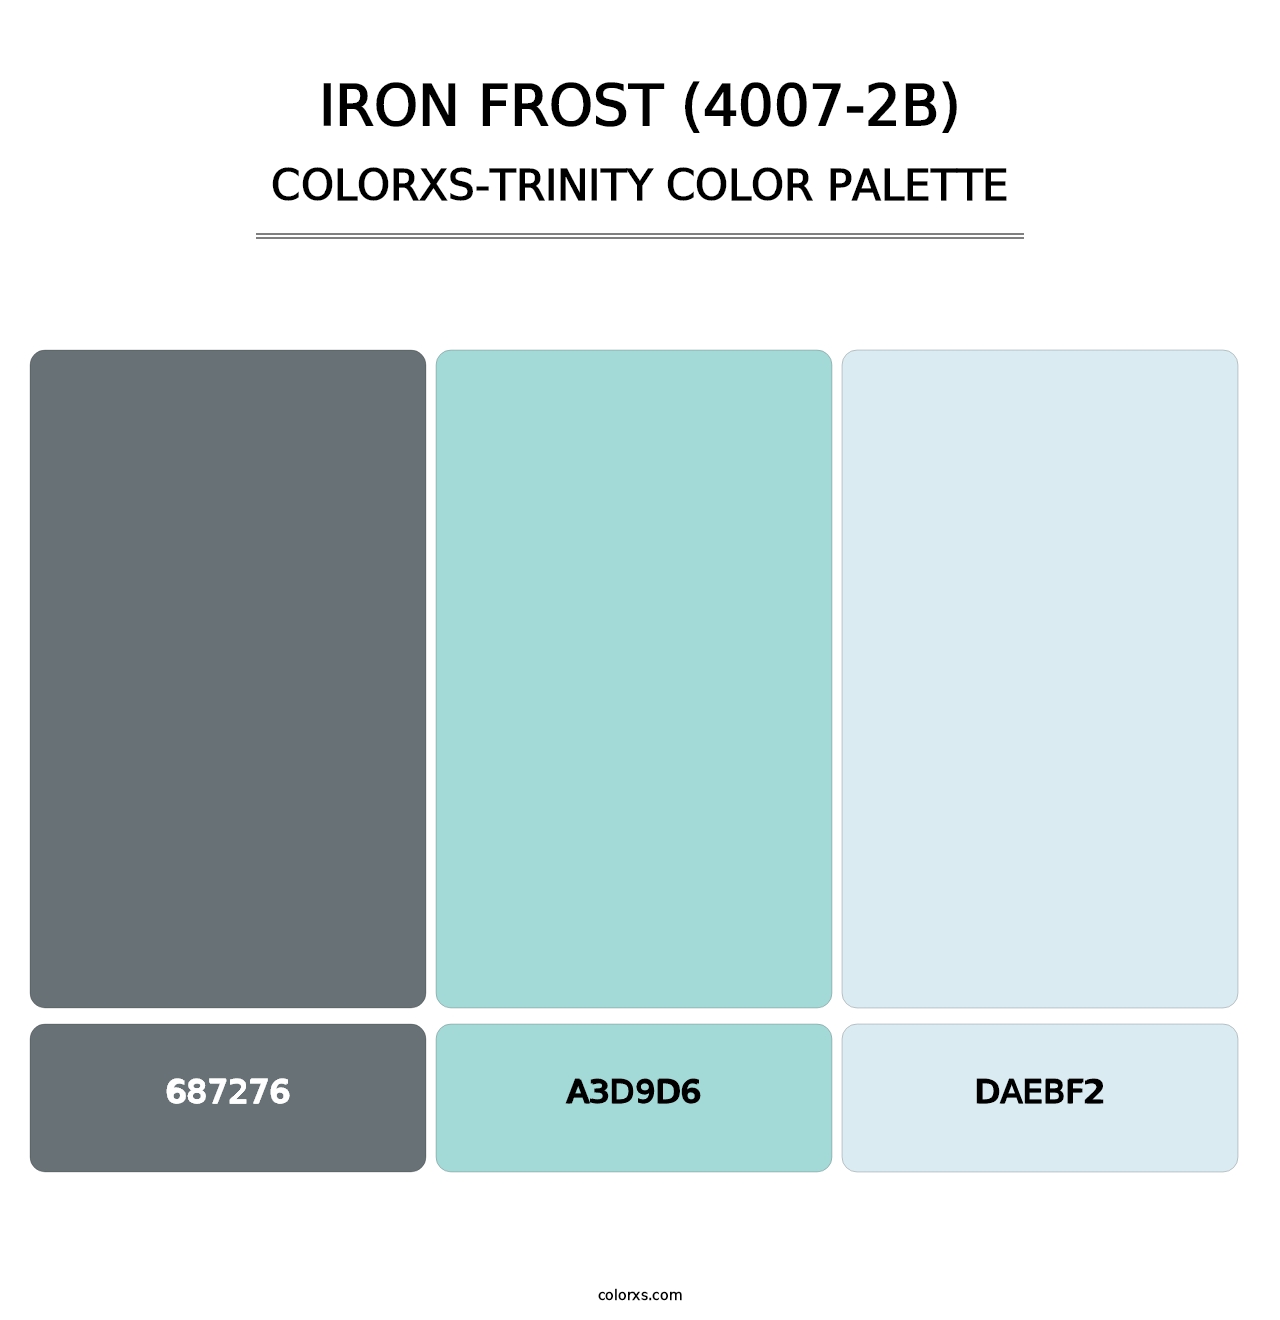 Iron Frost (4007-2B) - Colorxs Trinity Palette